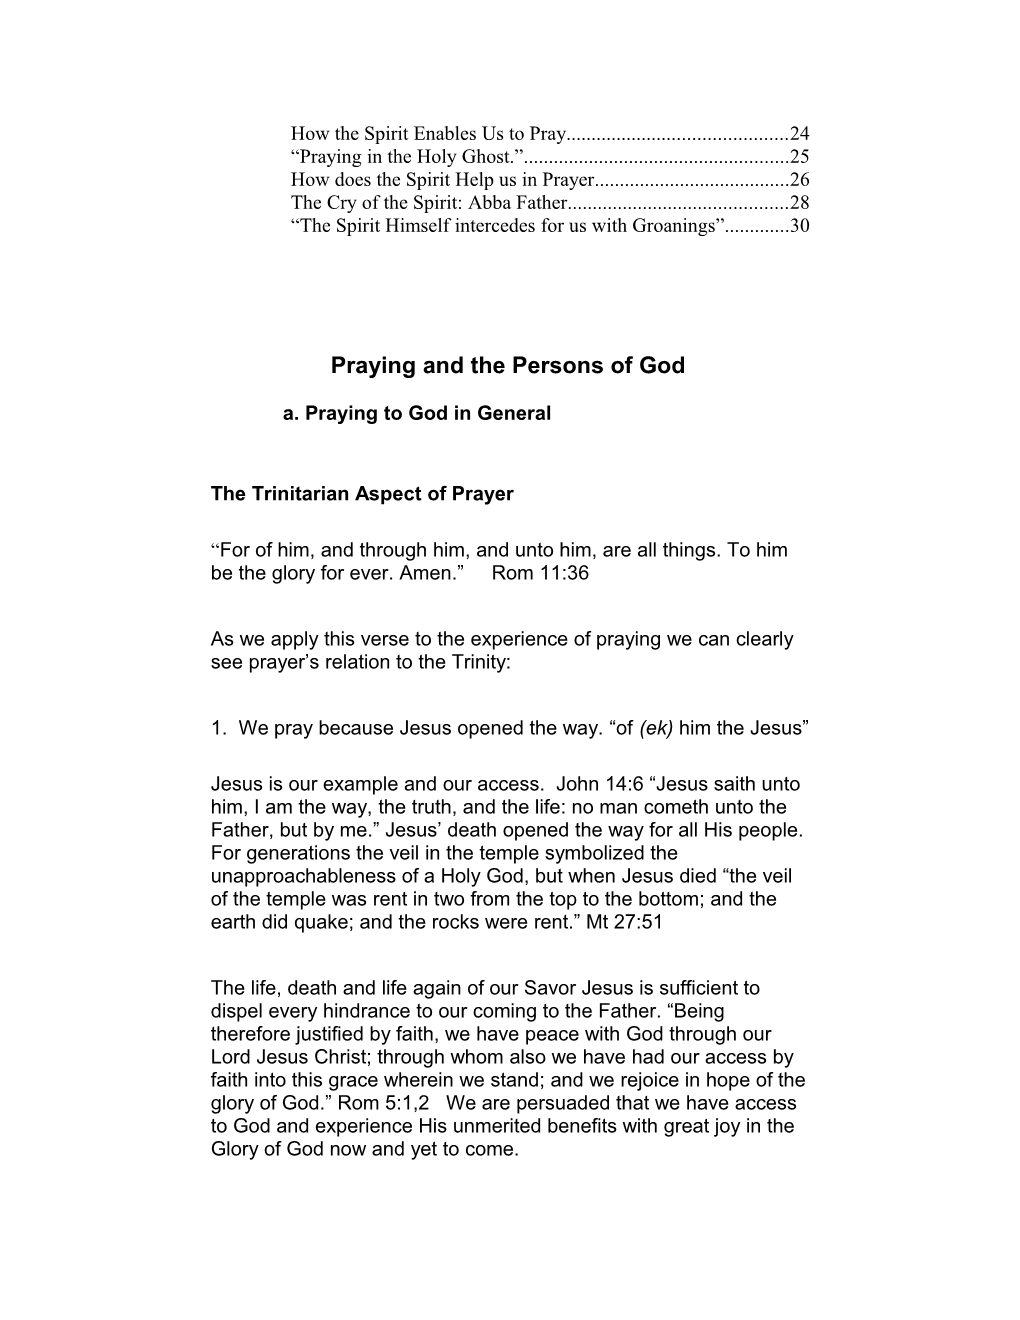 Praying and the Person of God